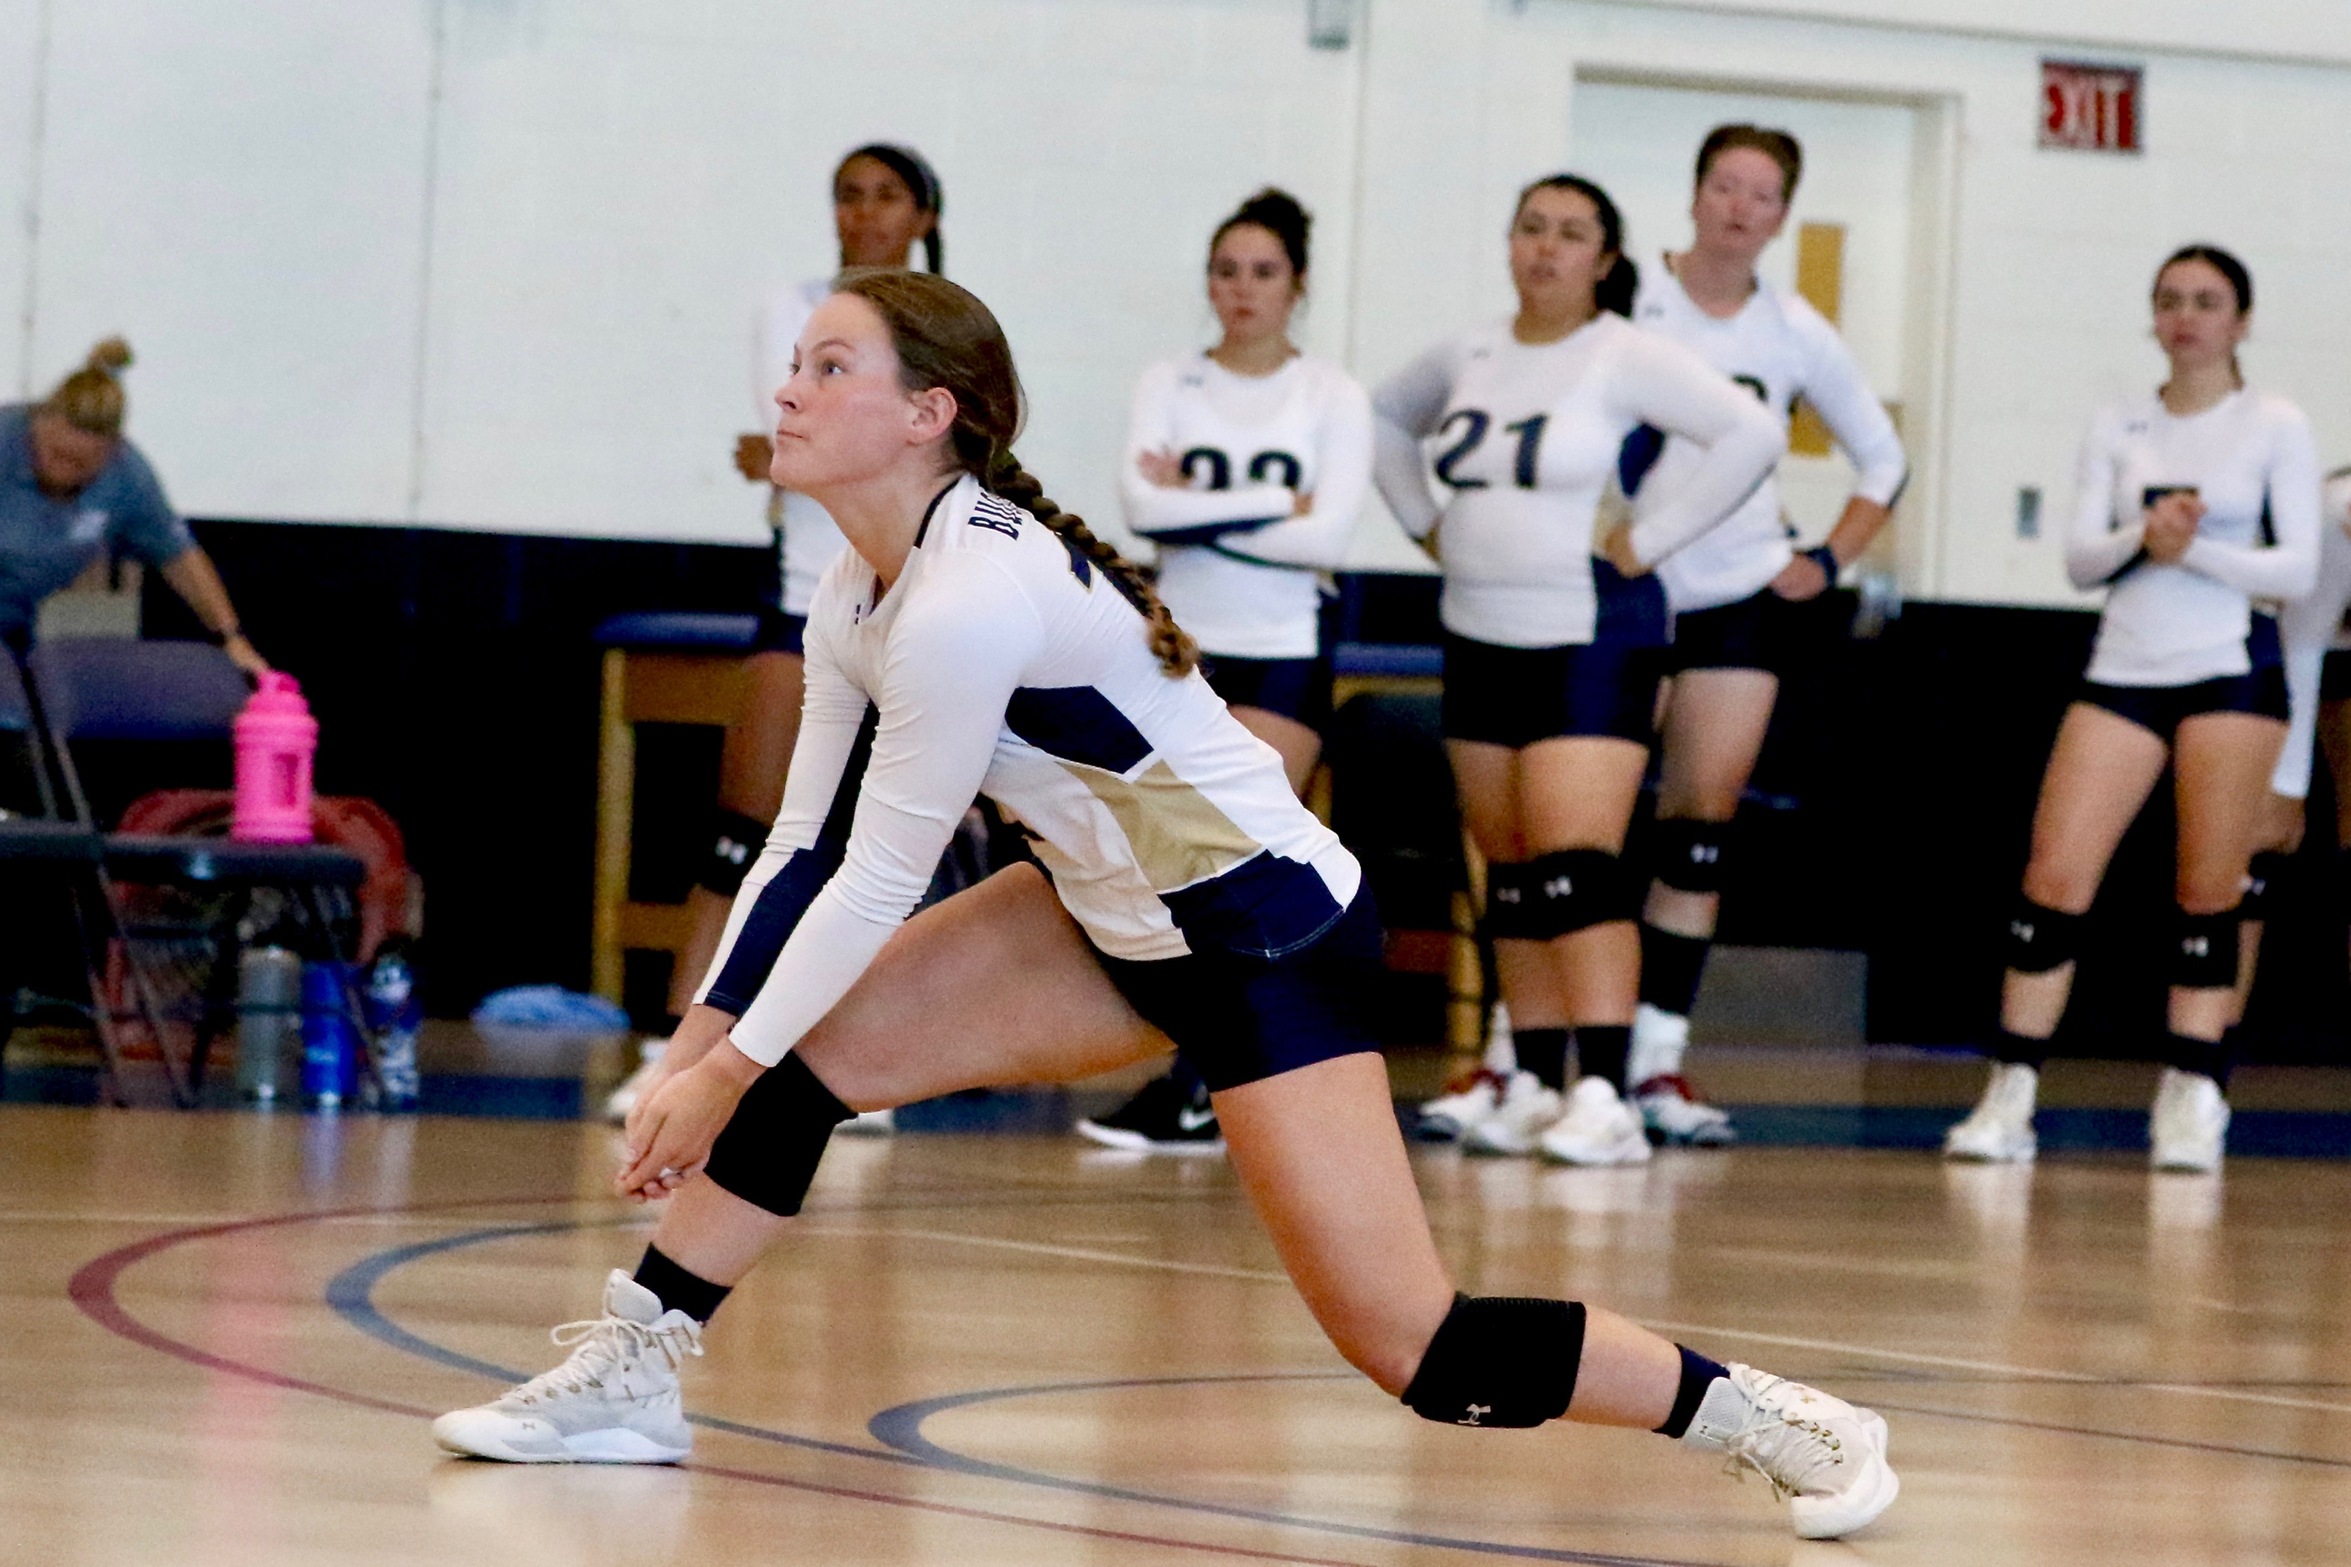 Volleyball Loses Both Ends of Tri-Match in Paxton